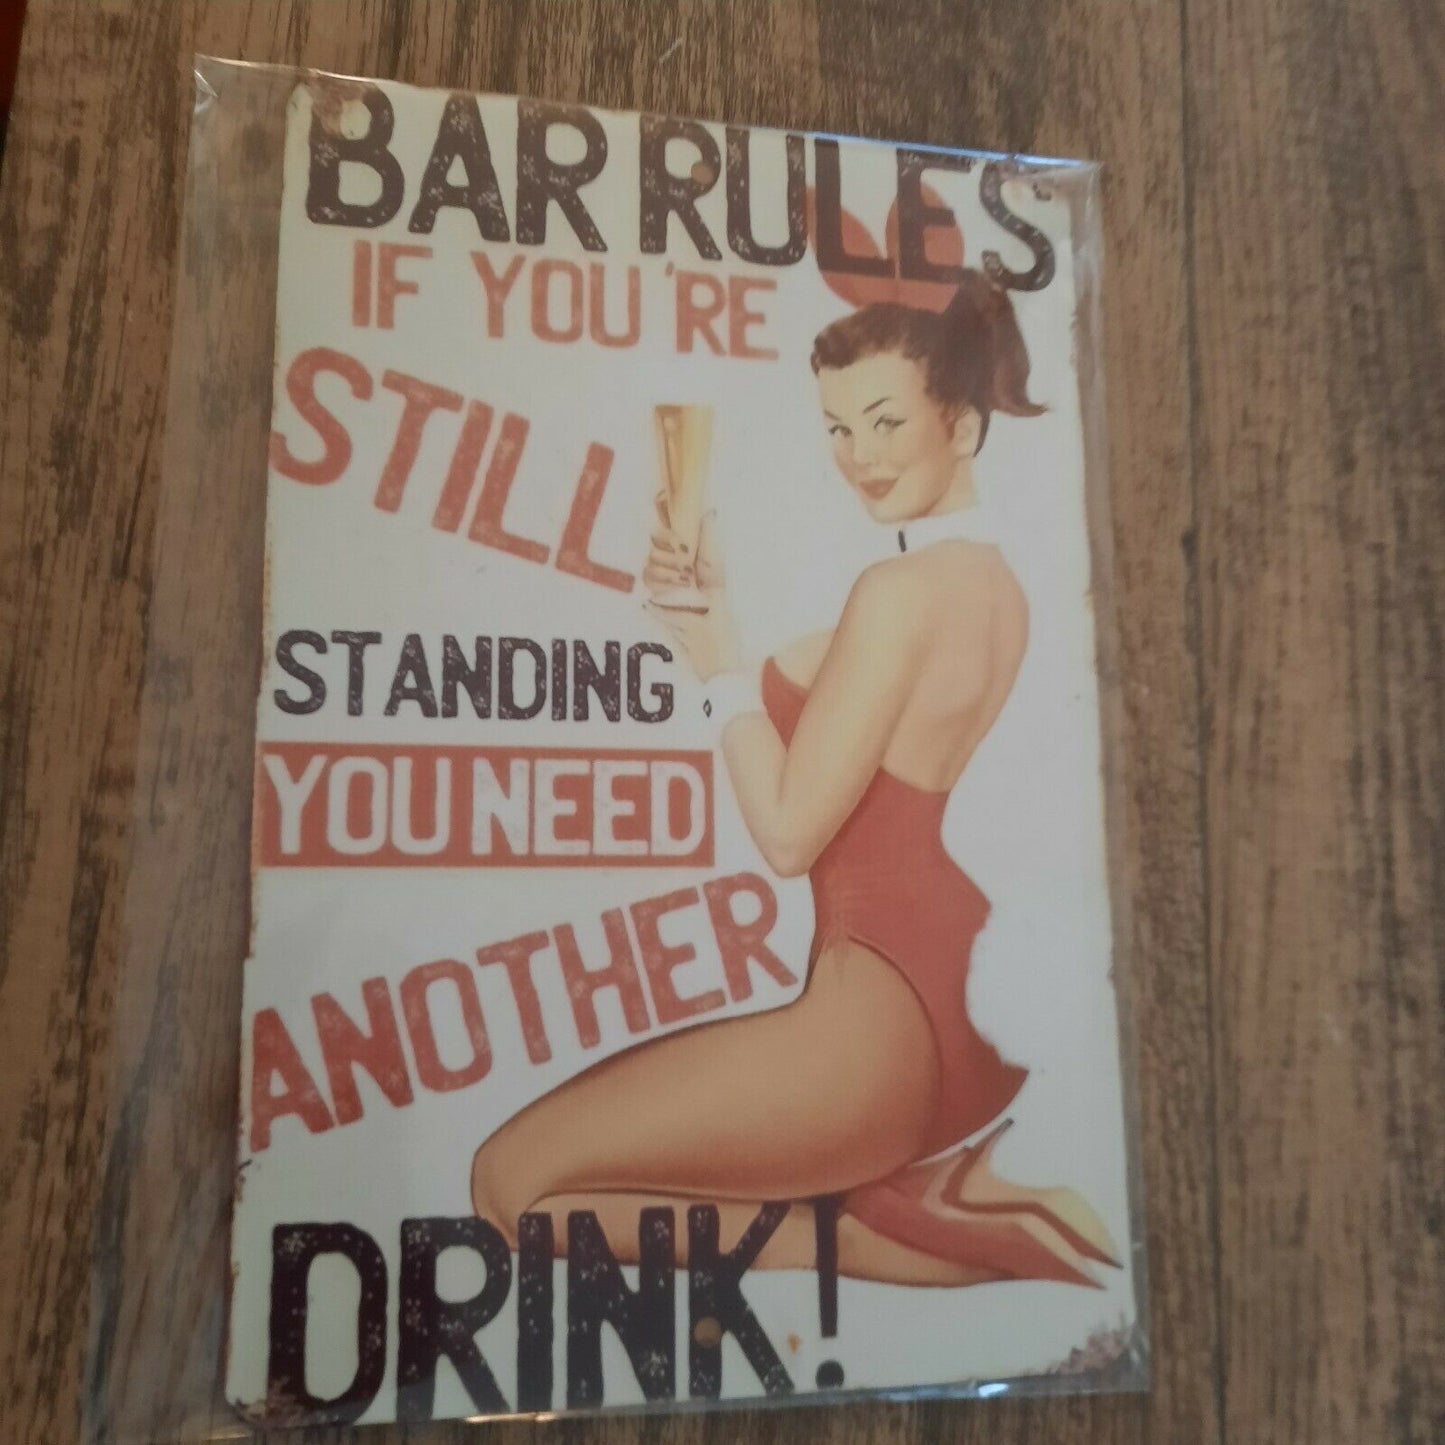 Bar Rules If You're Still Standing You Need Another Drink 8x12 Metal Wall Bar Sign Liquor